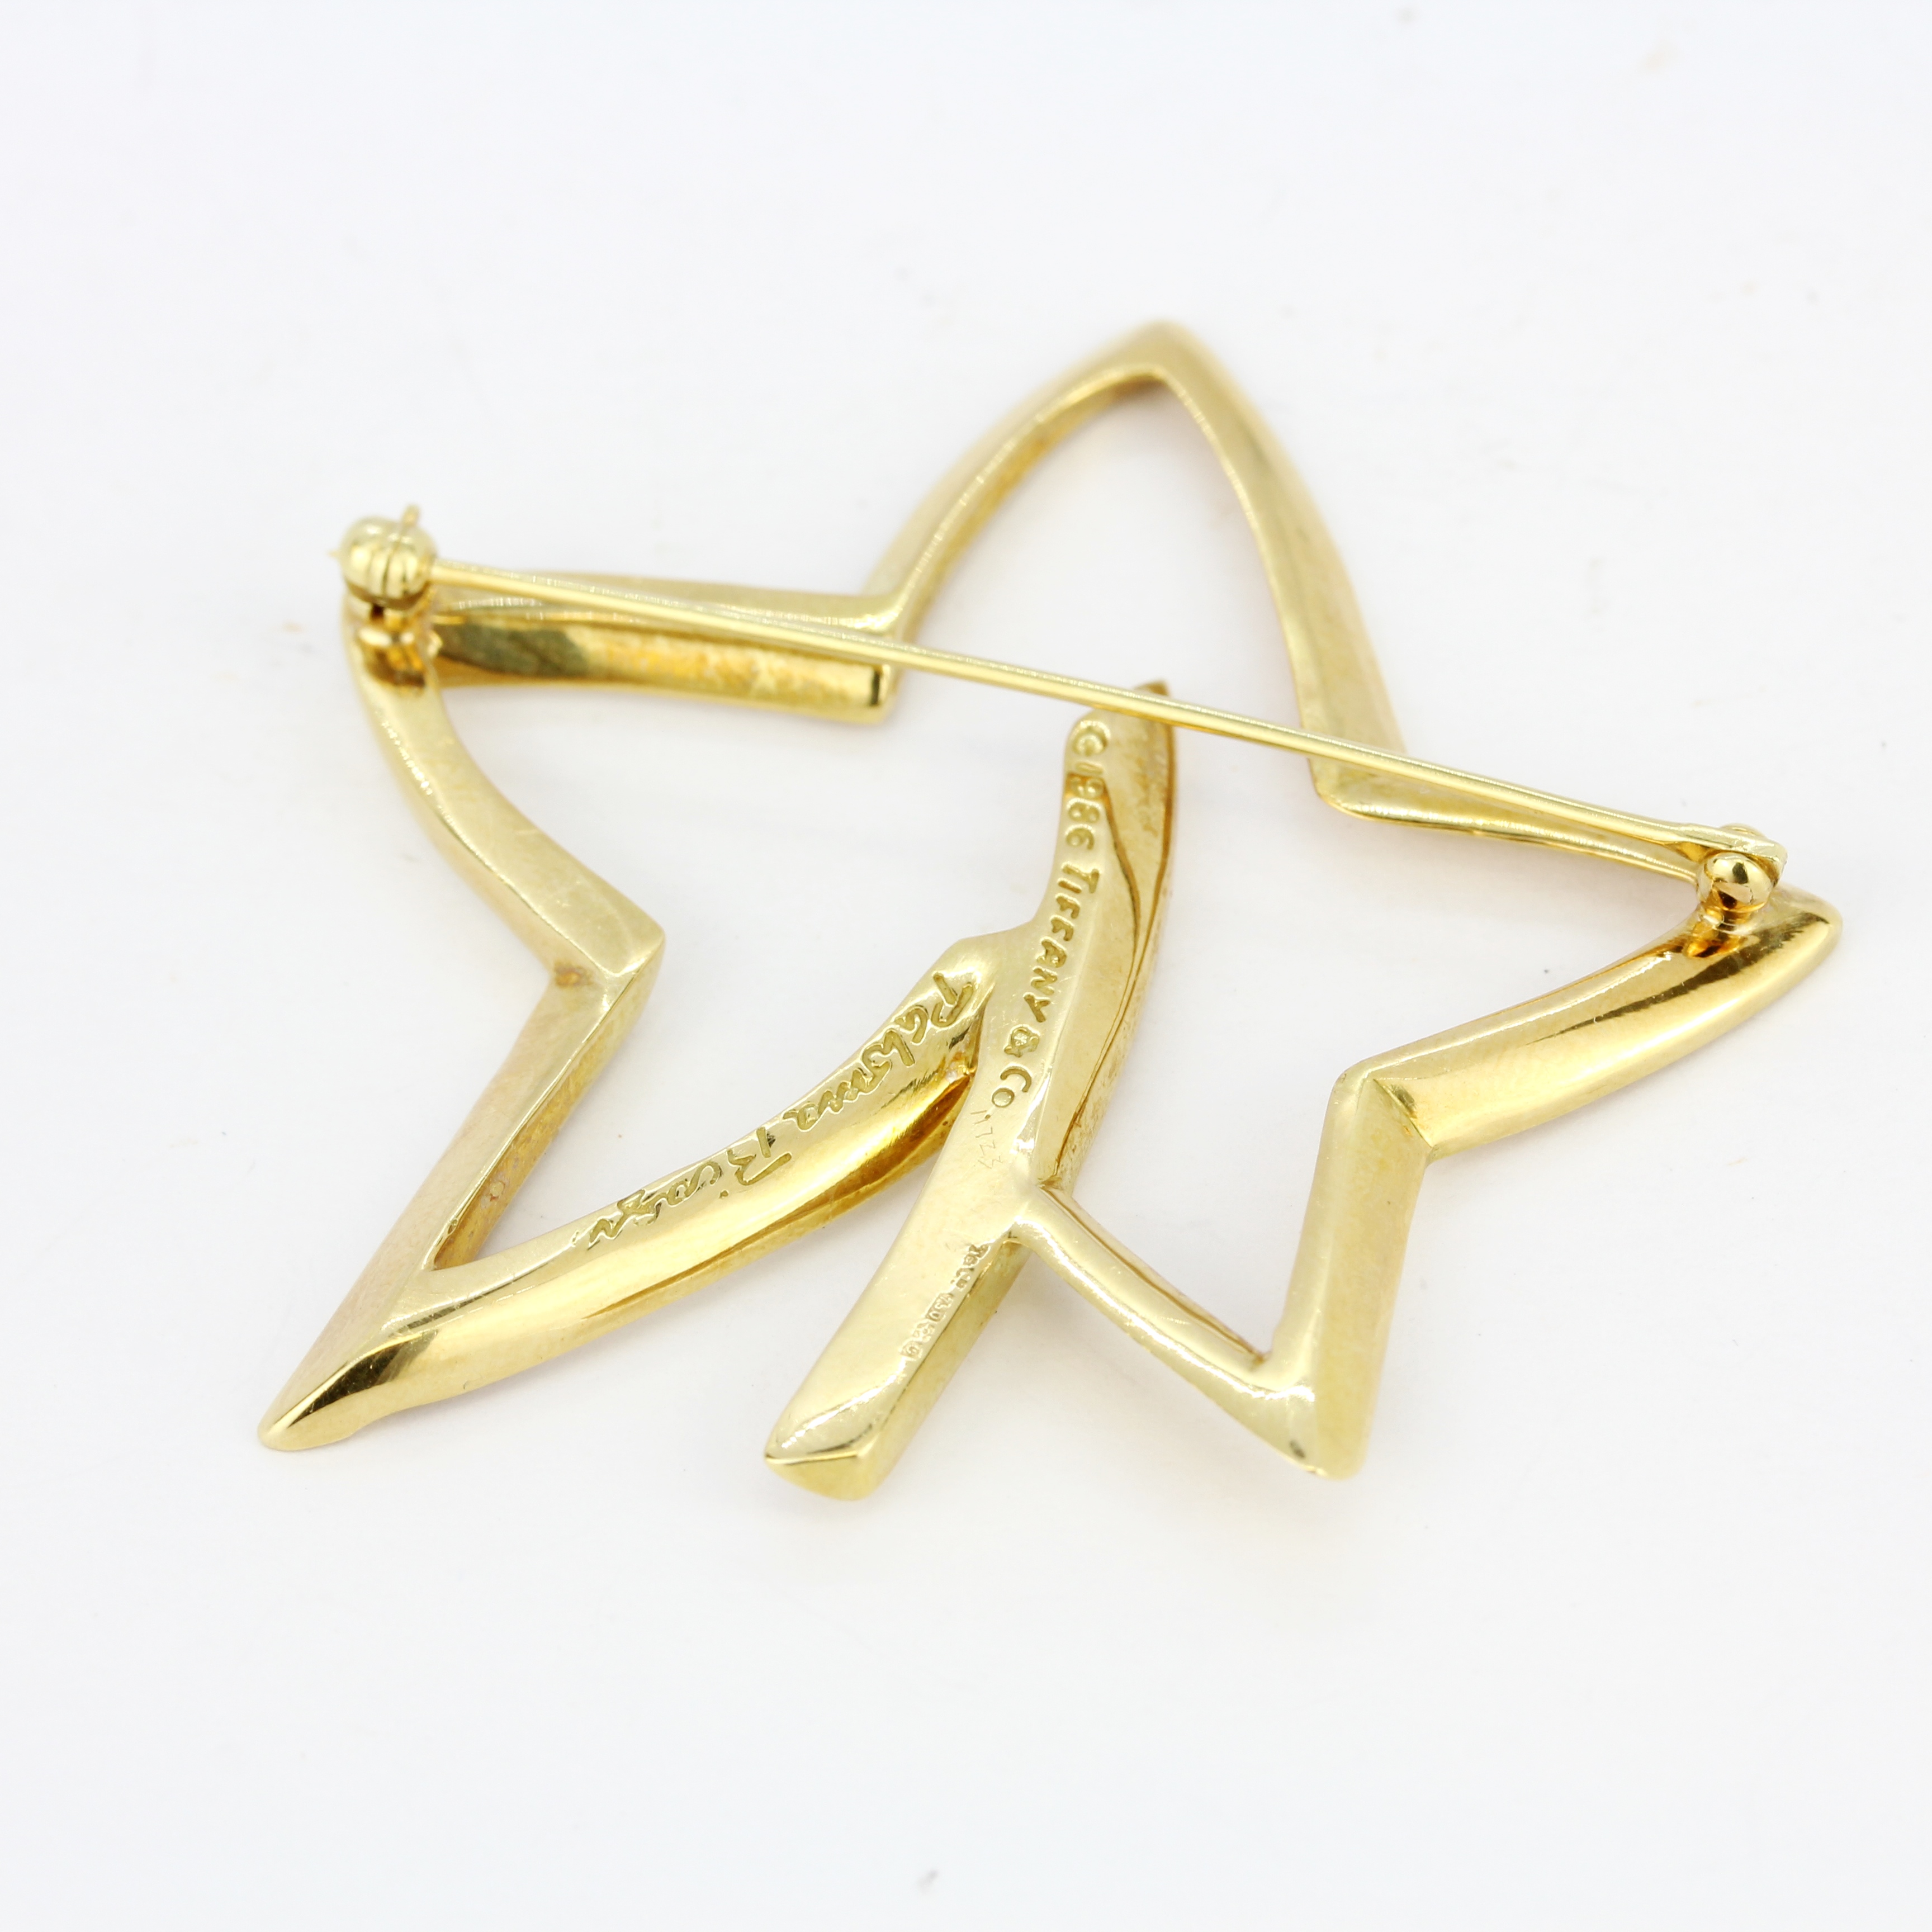 An 18ct yellow gold Tiffany & Co star shaped brooch, L. 5.2cm. - Image 2 of 3